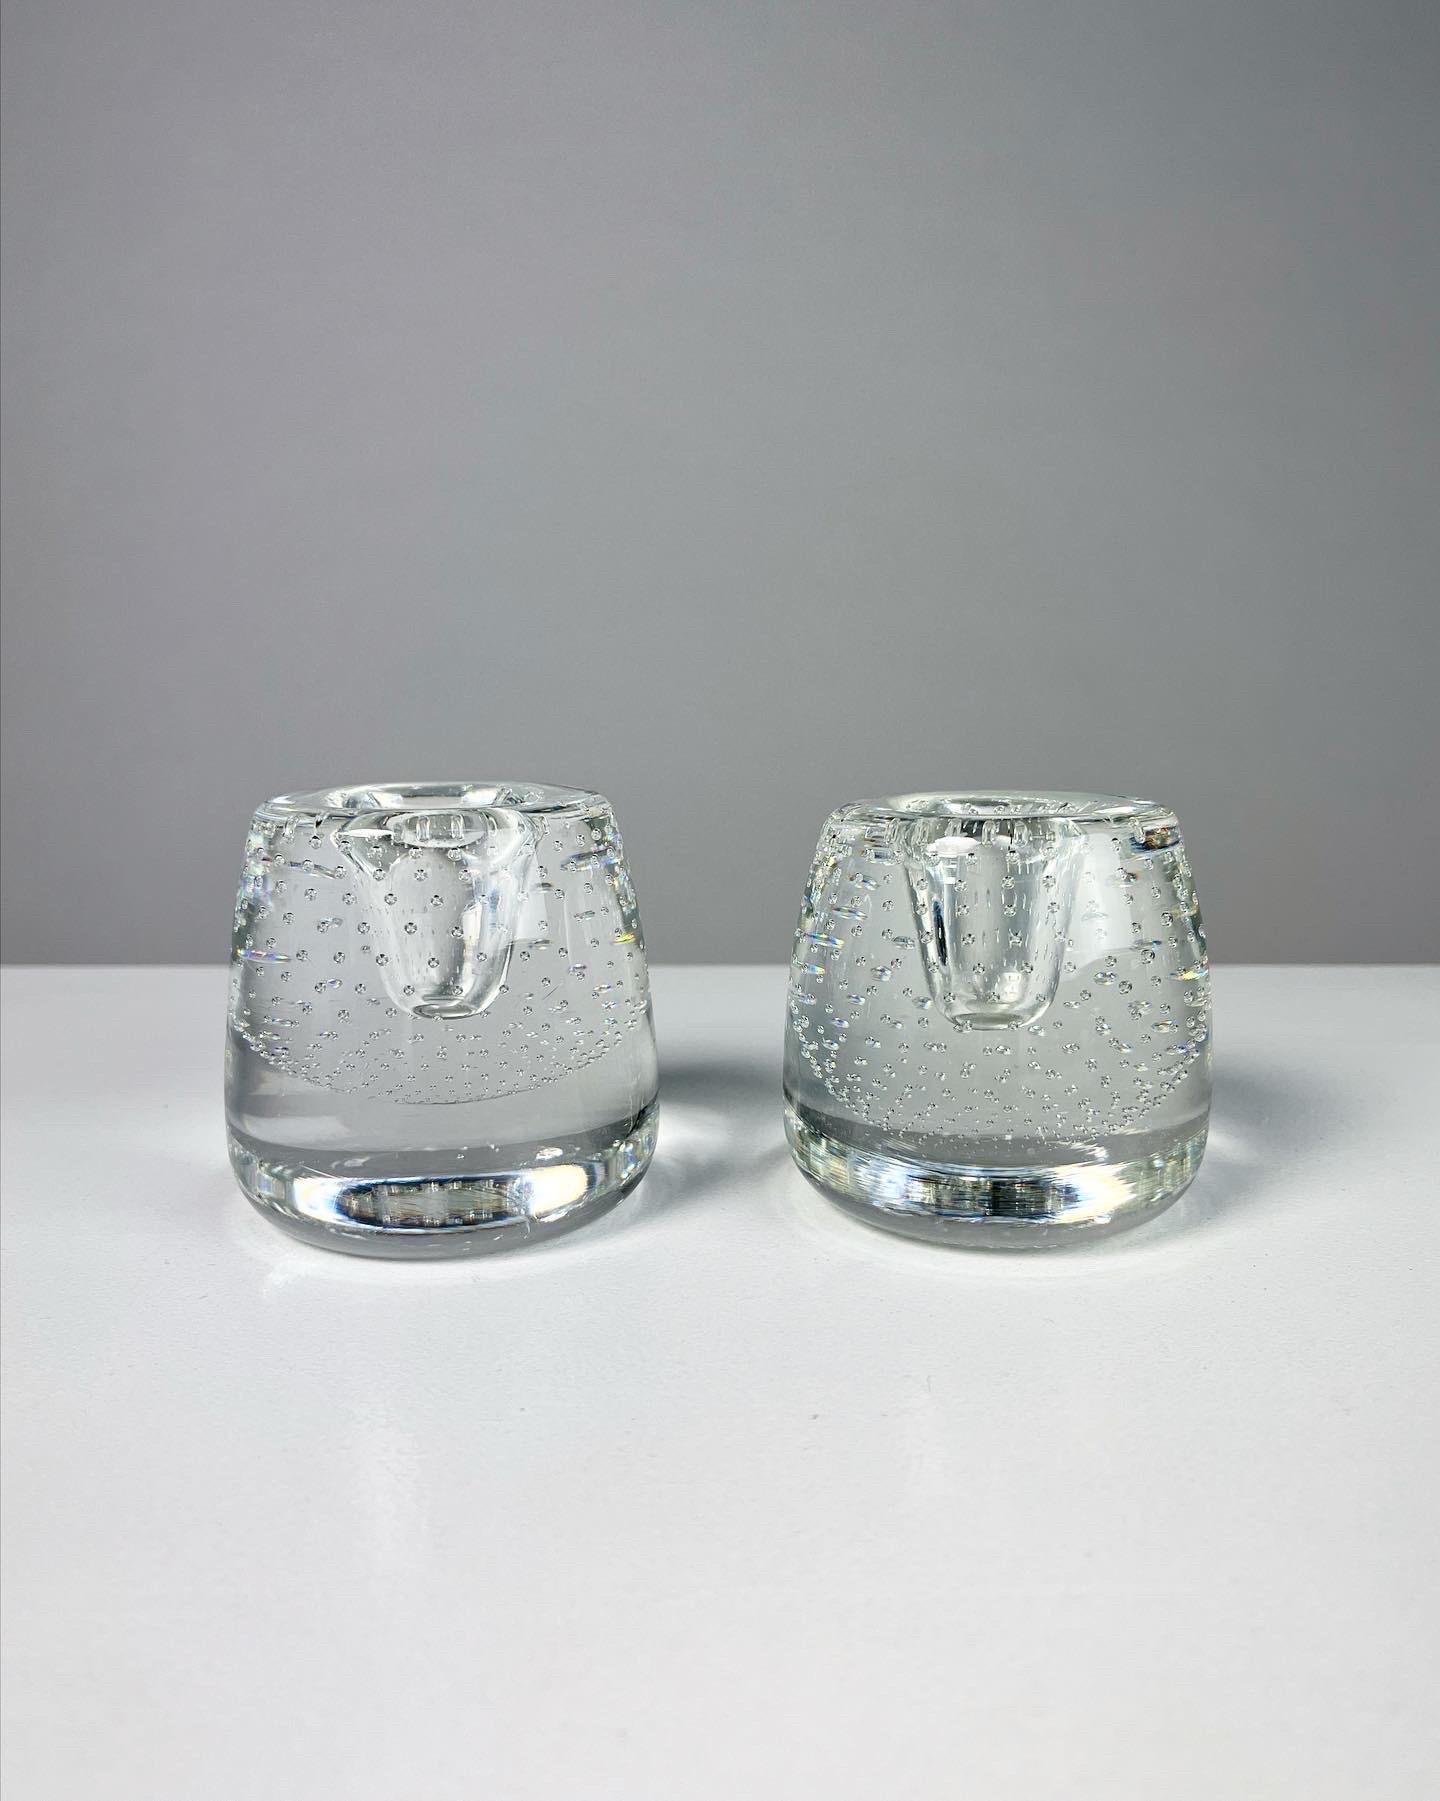 Pair of rare glass candle sticks by Ernest Gordon for Åfors glassworks in Sweden, 1960s.
Hand-formed with a controlled bubble pattern, signed on bottom.

Diameter: 7 cm
Height: 7 cm
For candles with a diameter of 2 cm

